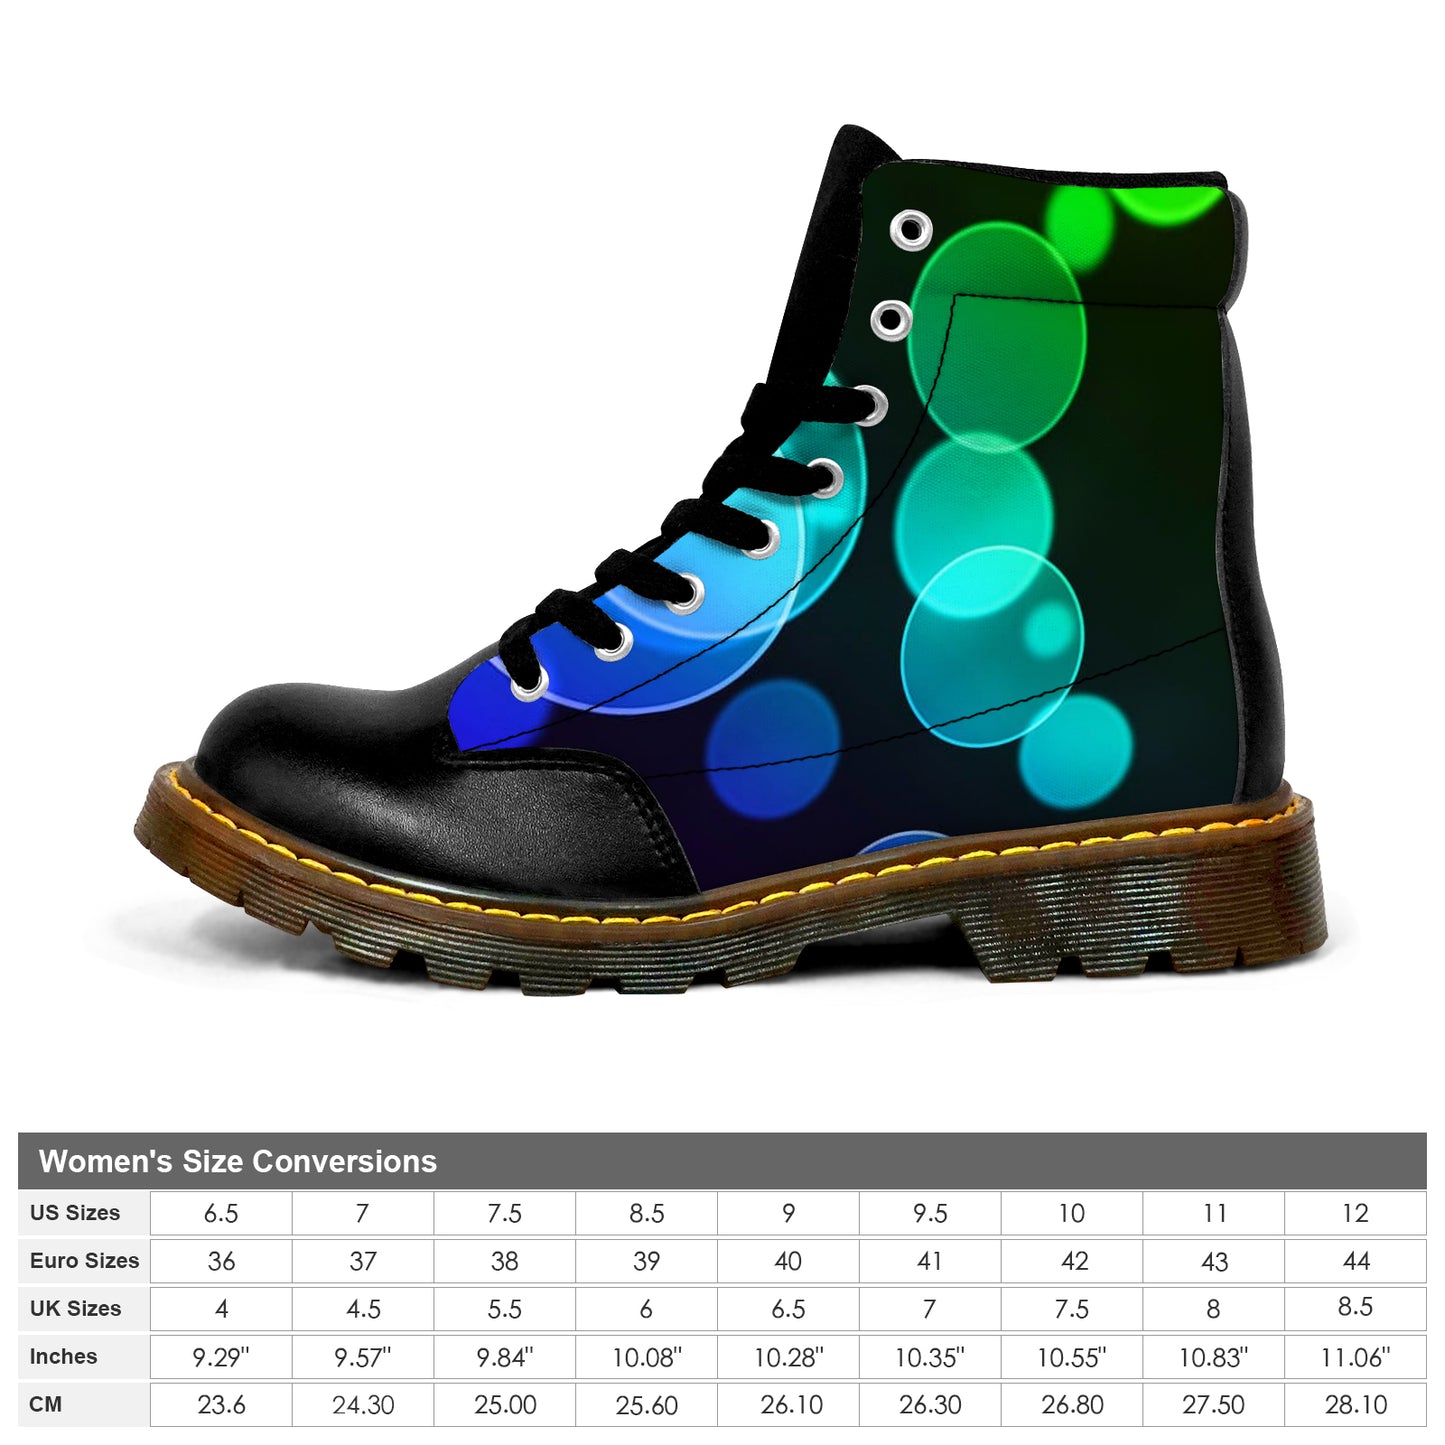 Winter Round Toe Women's Boots - Colored Circles